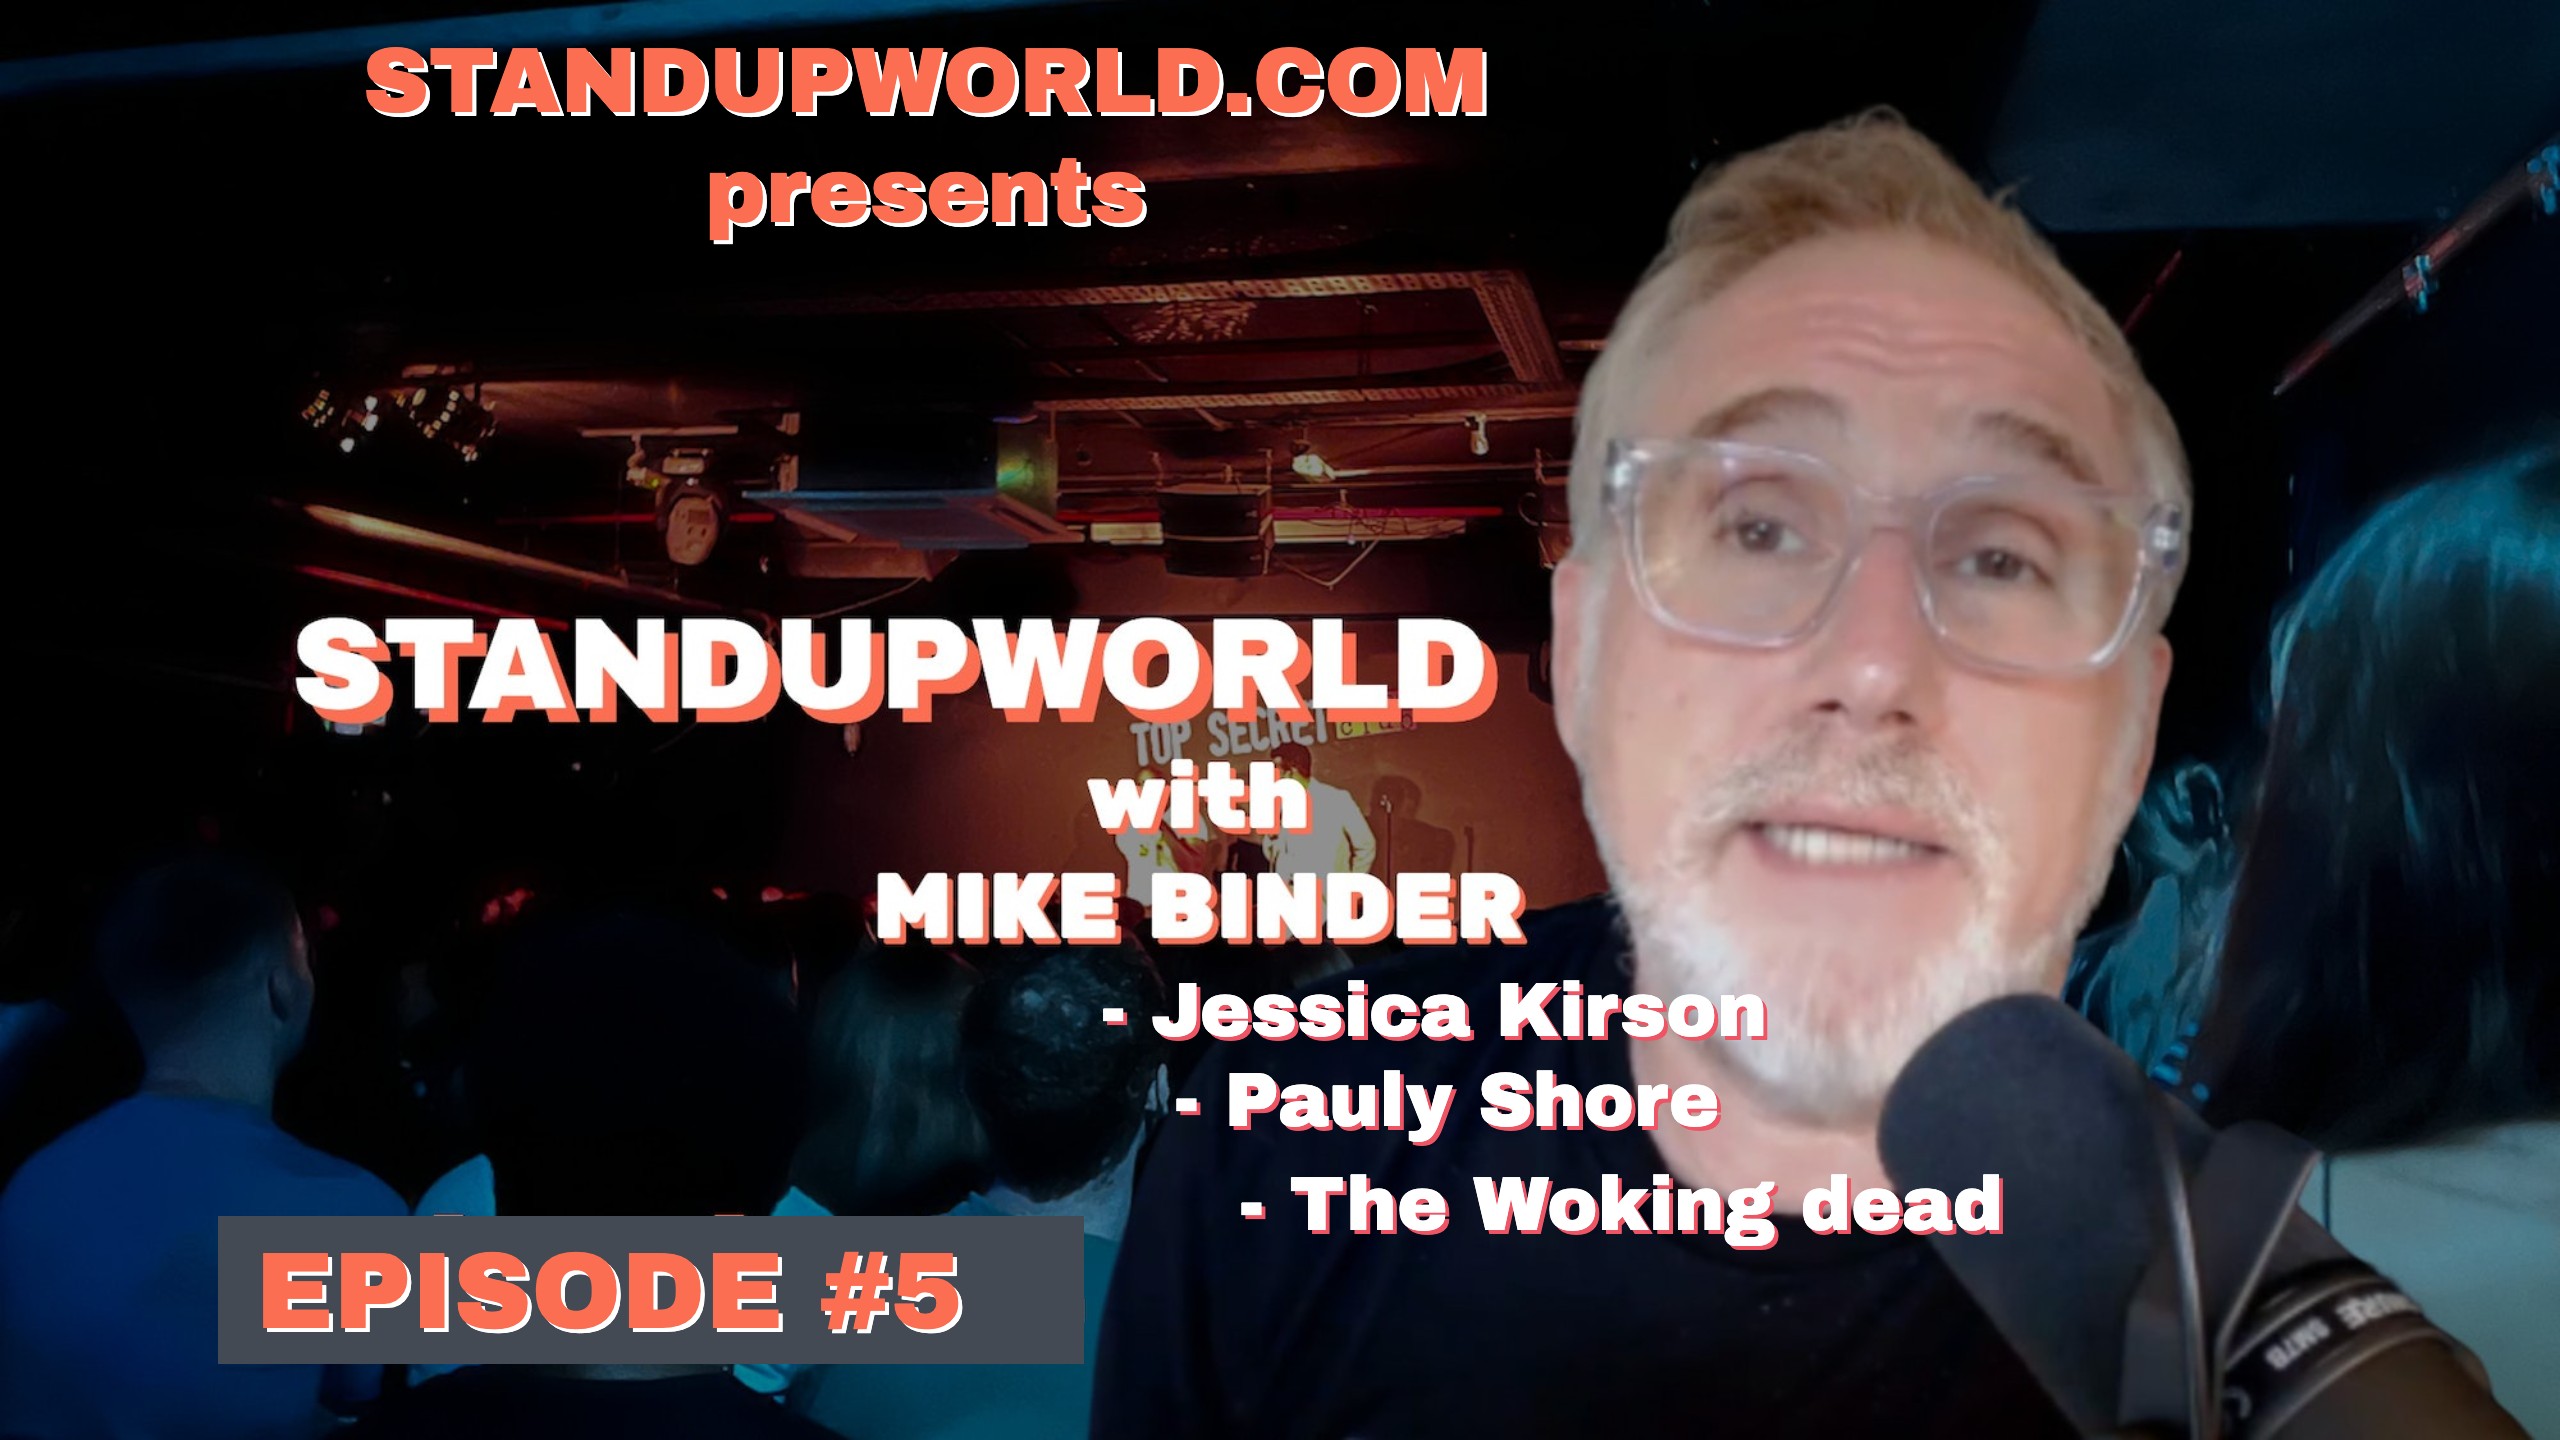 Featured image for “STANDUPWORLD PODCAST / Ep.#5”